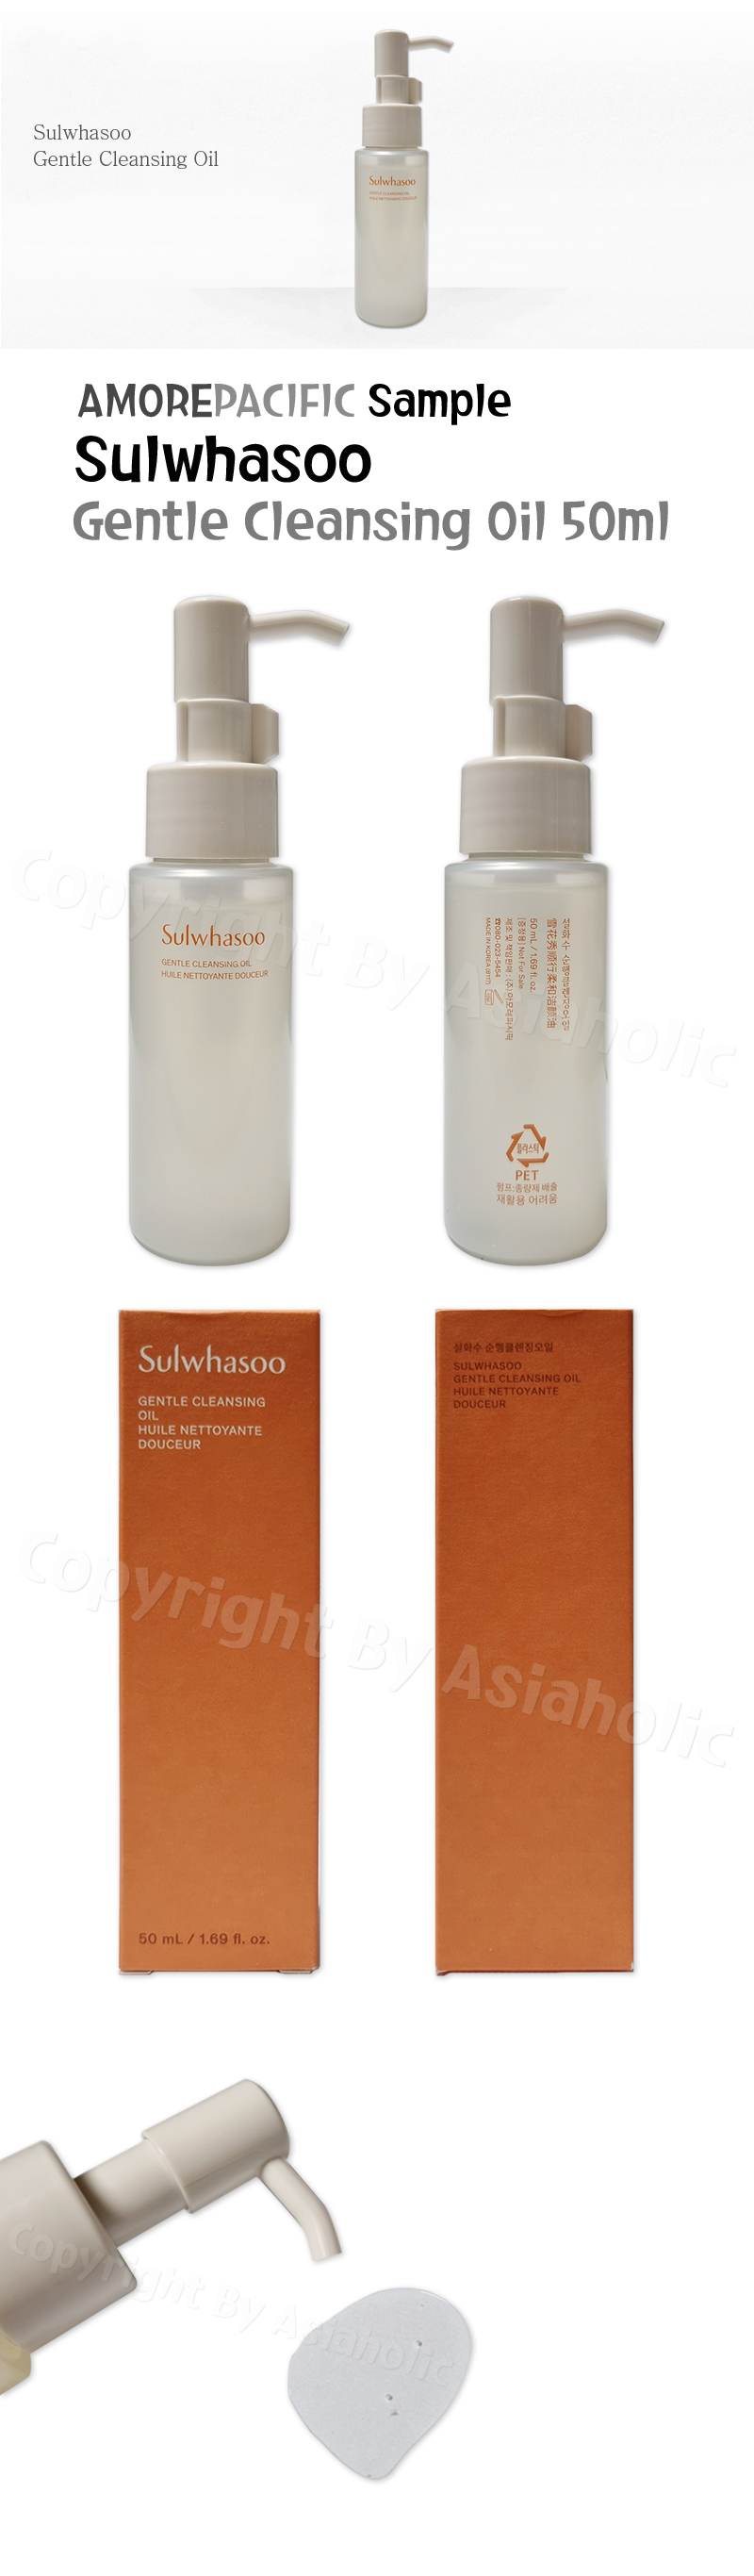 Sulwhasoo Gentle Cleansing Oil 50ml (1pcs ~ 10pcs) Sample Newest Version